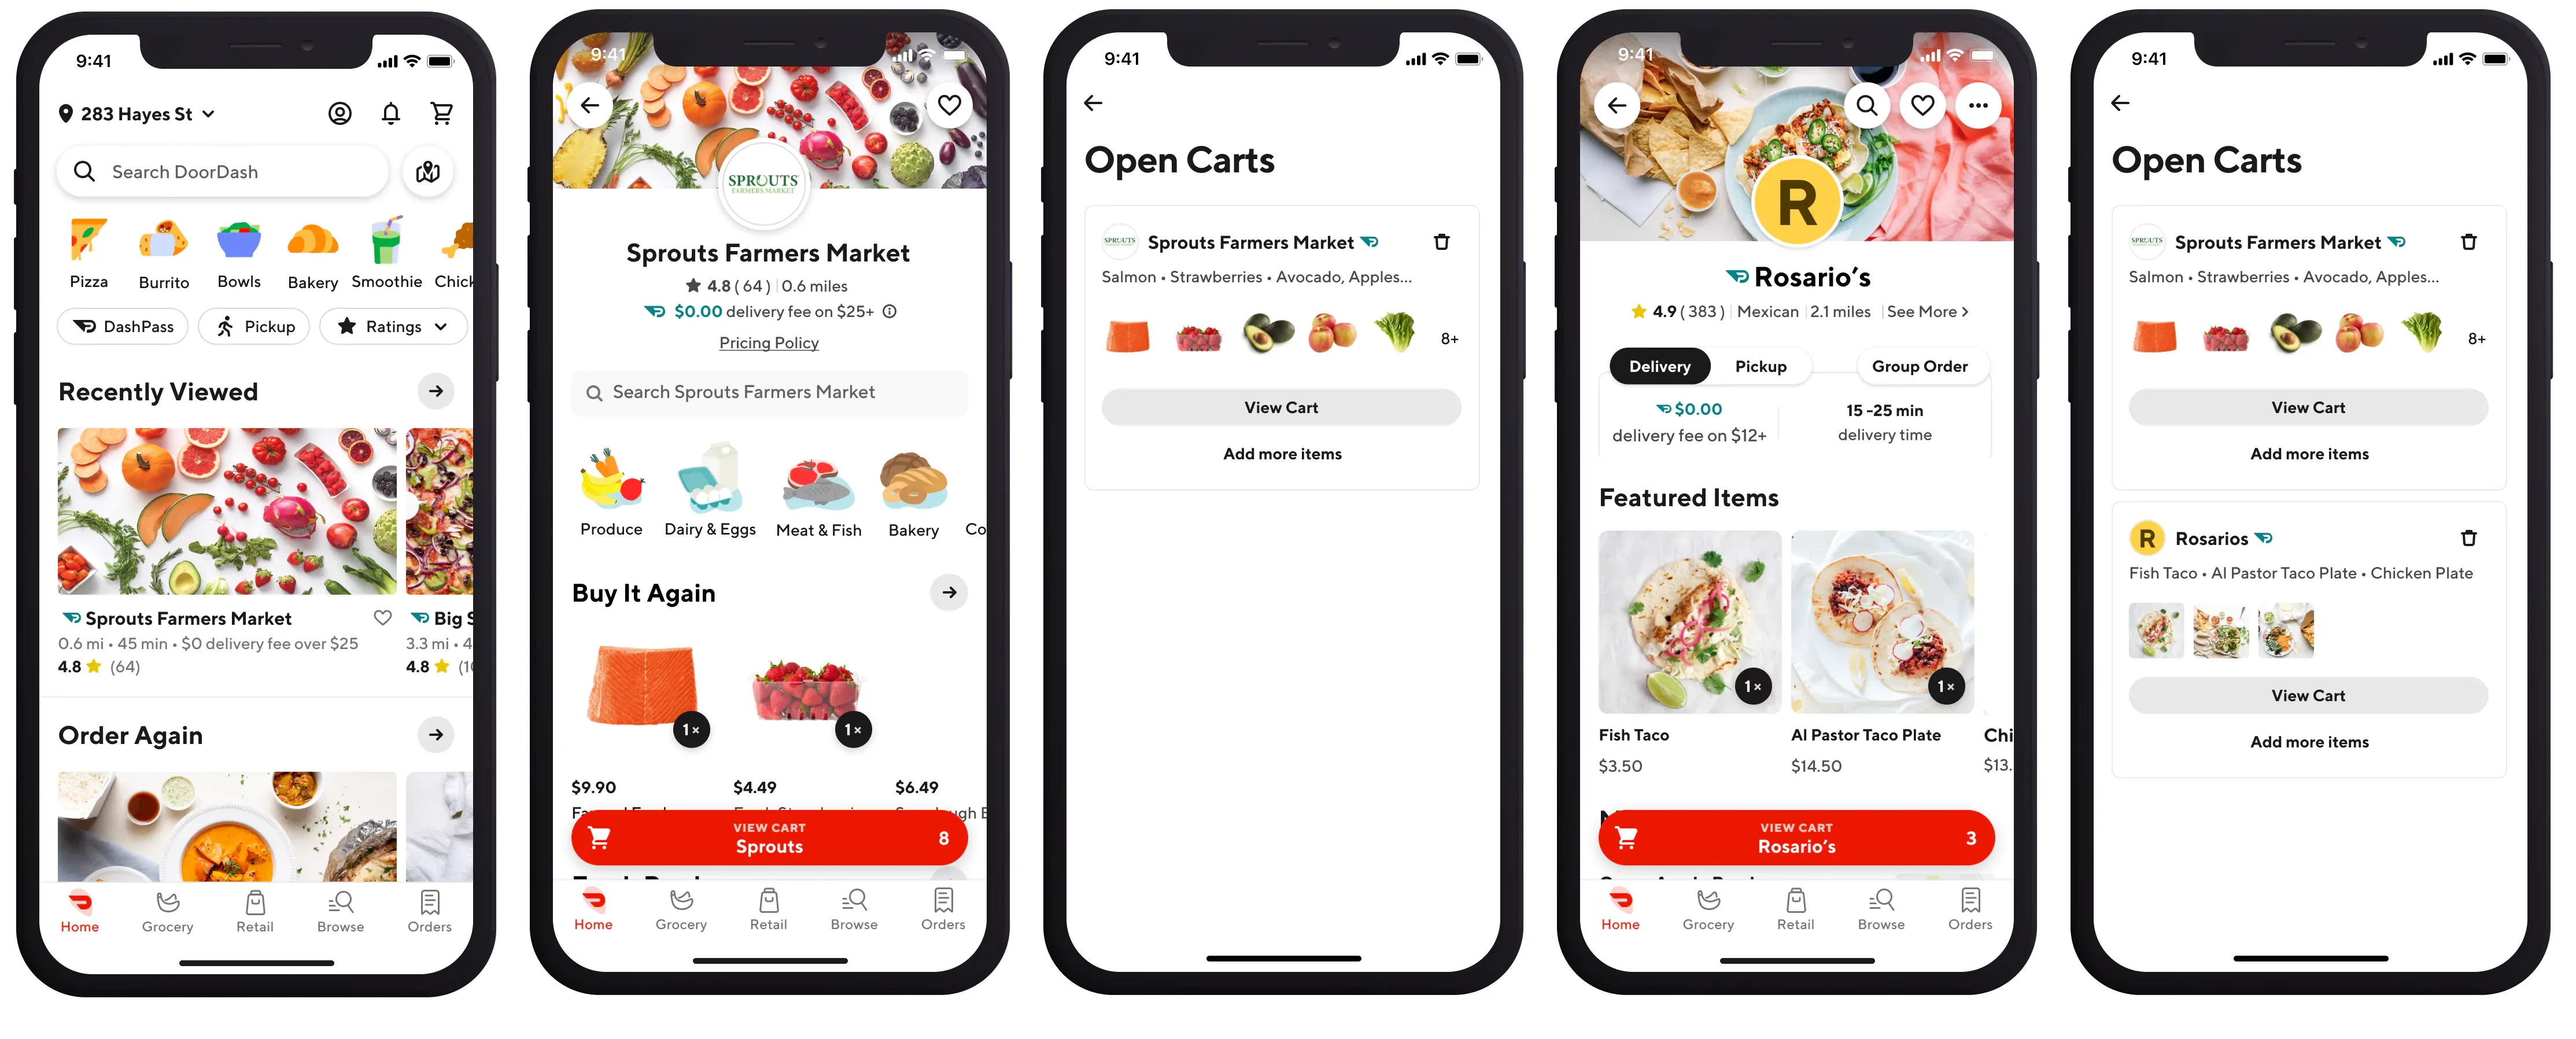 DoorDash connects users with a vast network of restaurants in their area. 